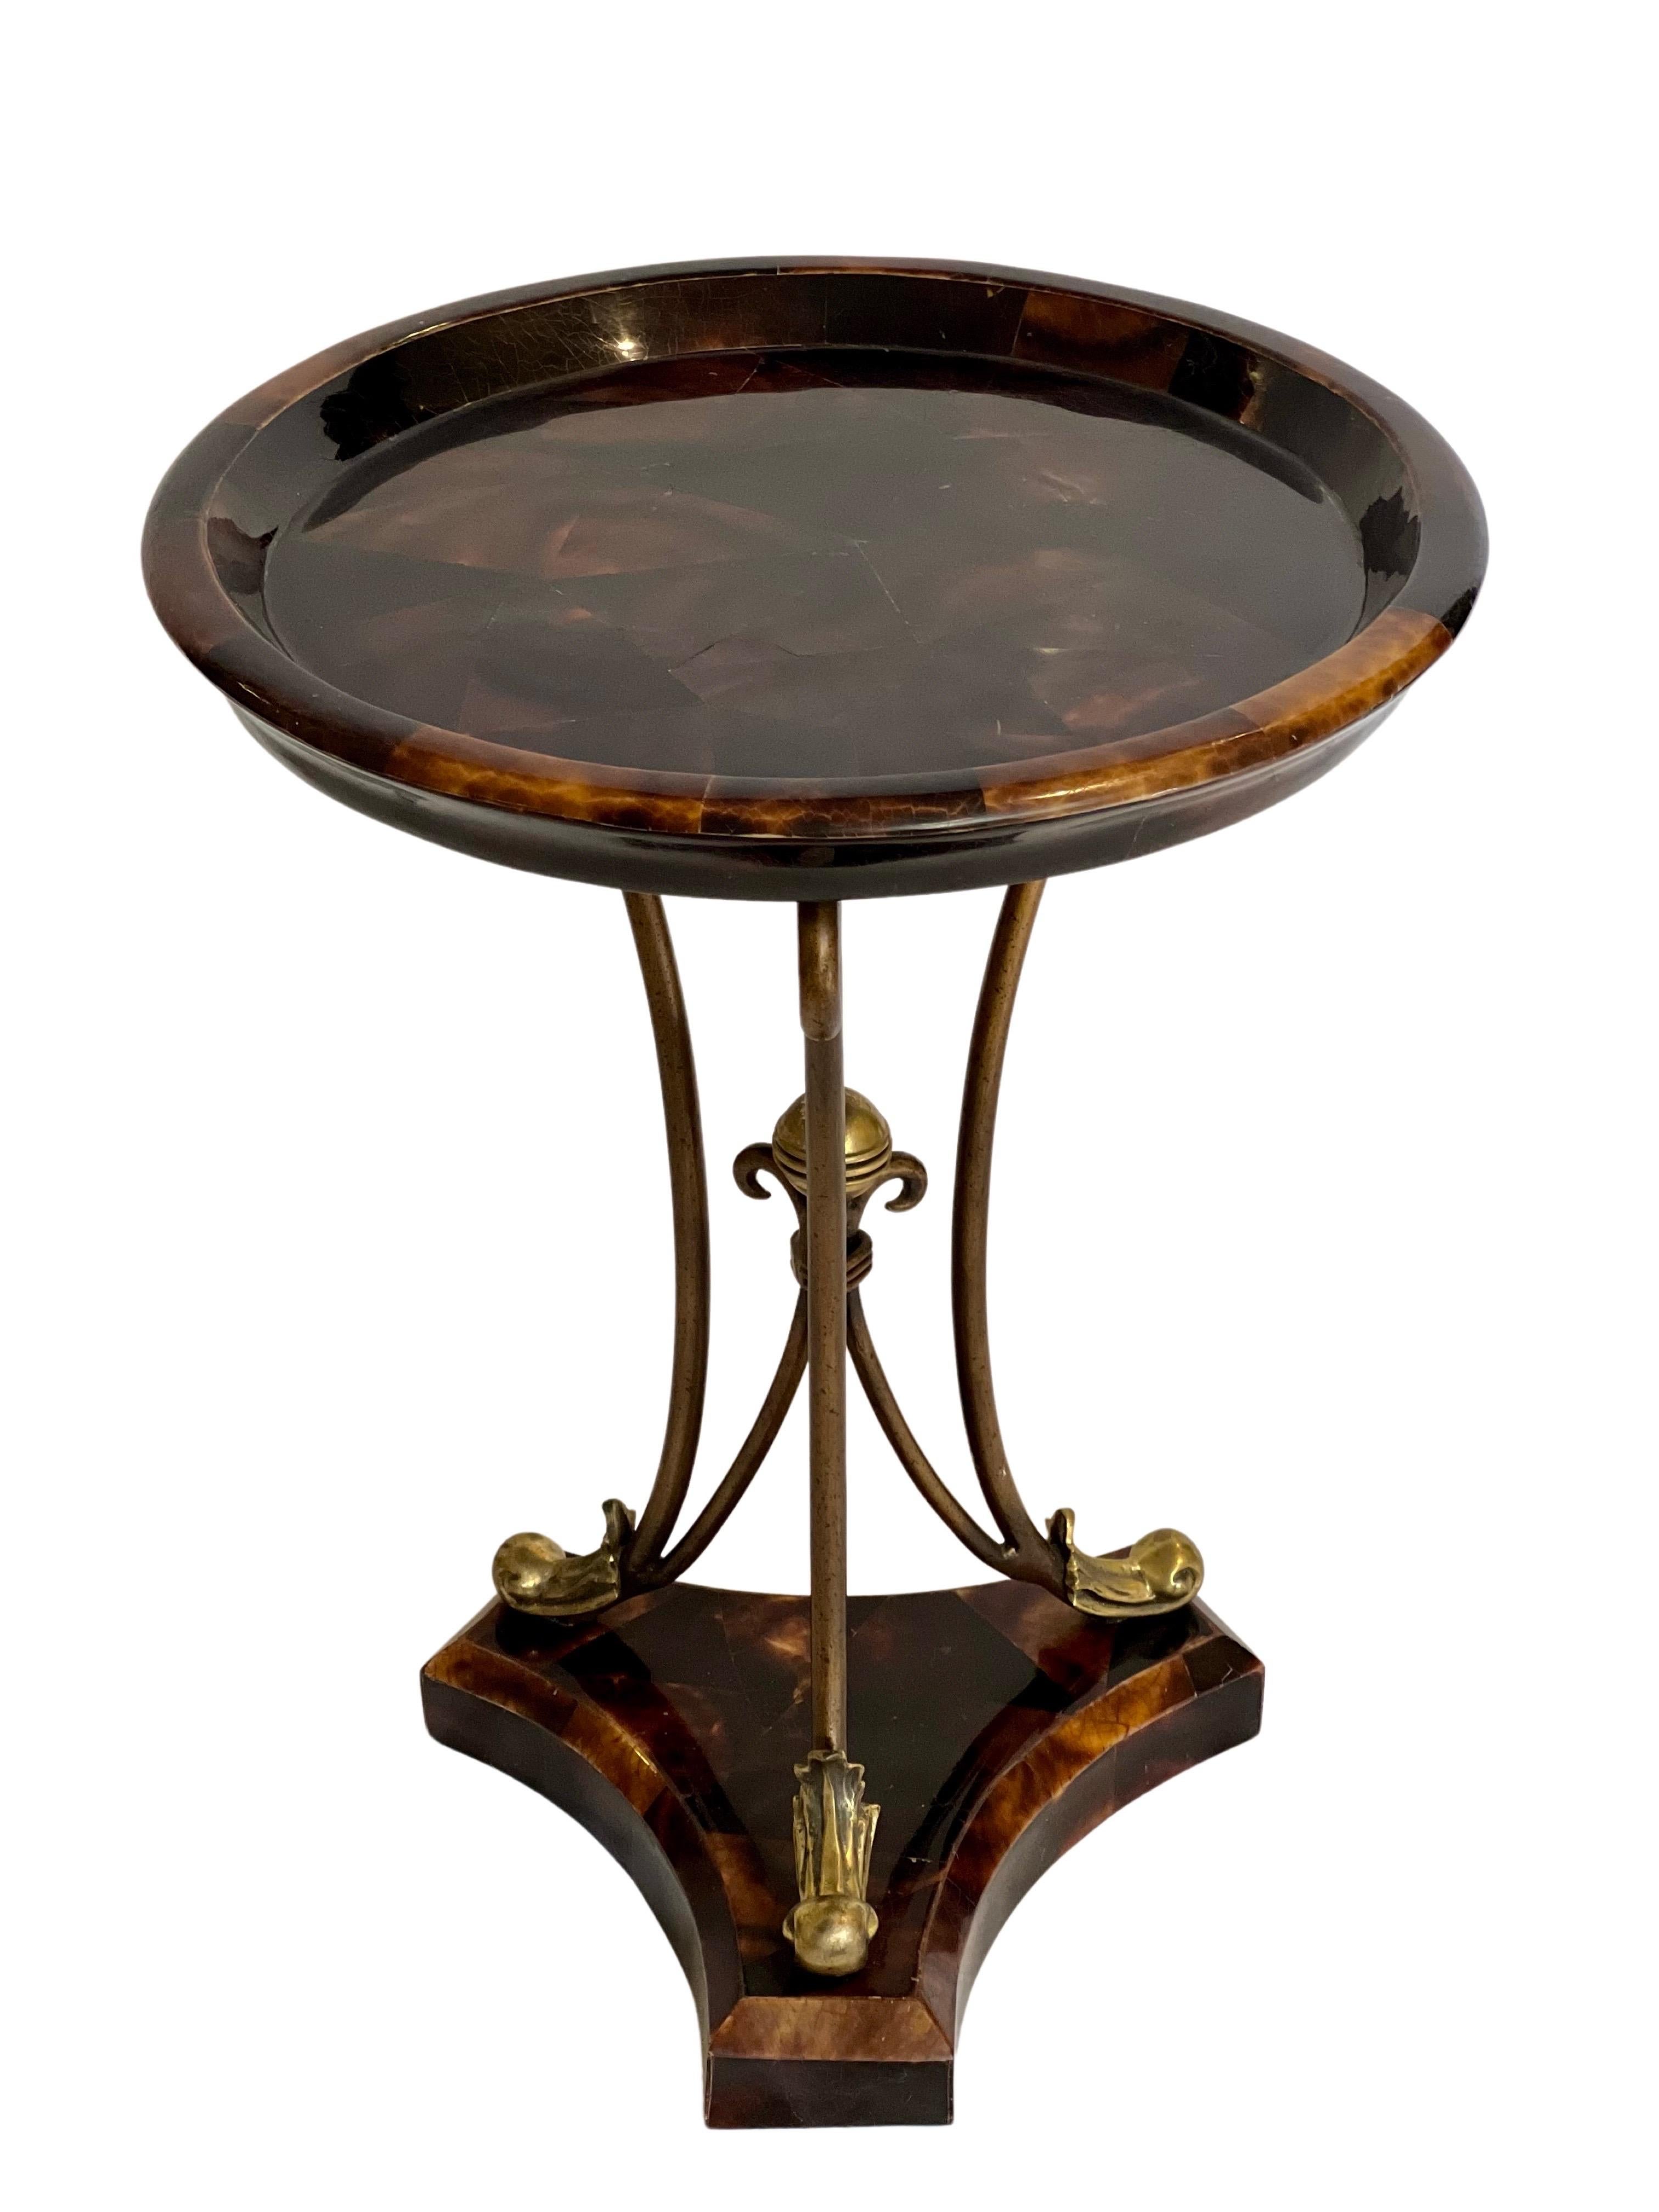 1970's Maitland Smith marquetry inlaid occasional table with a chunky geometric glossy horn veneer. Bronzed iron and gold leaf scrolled stem.